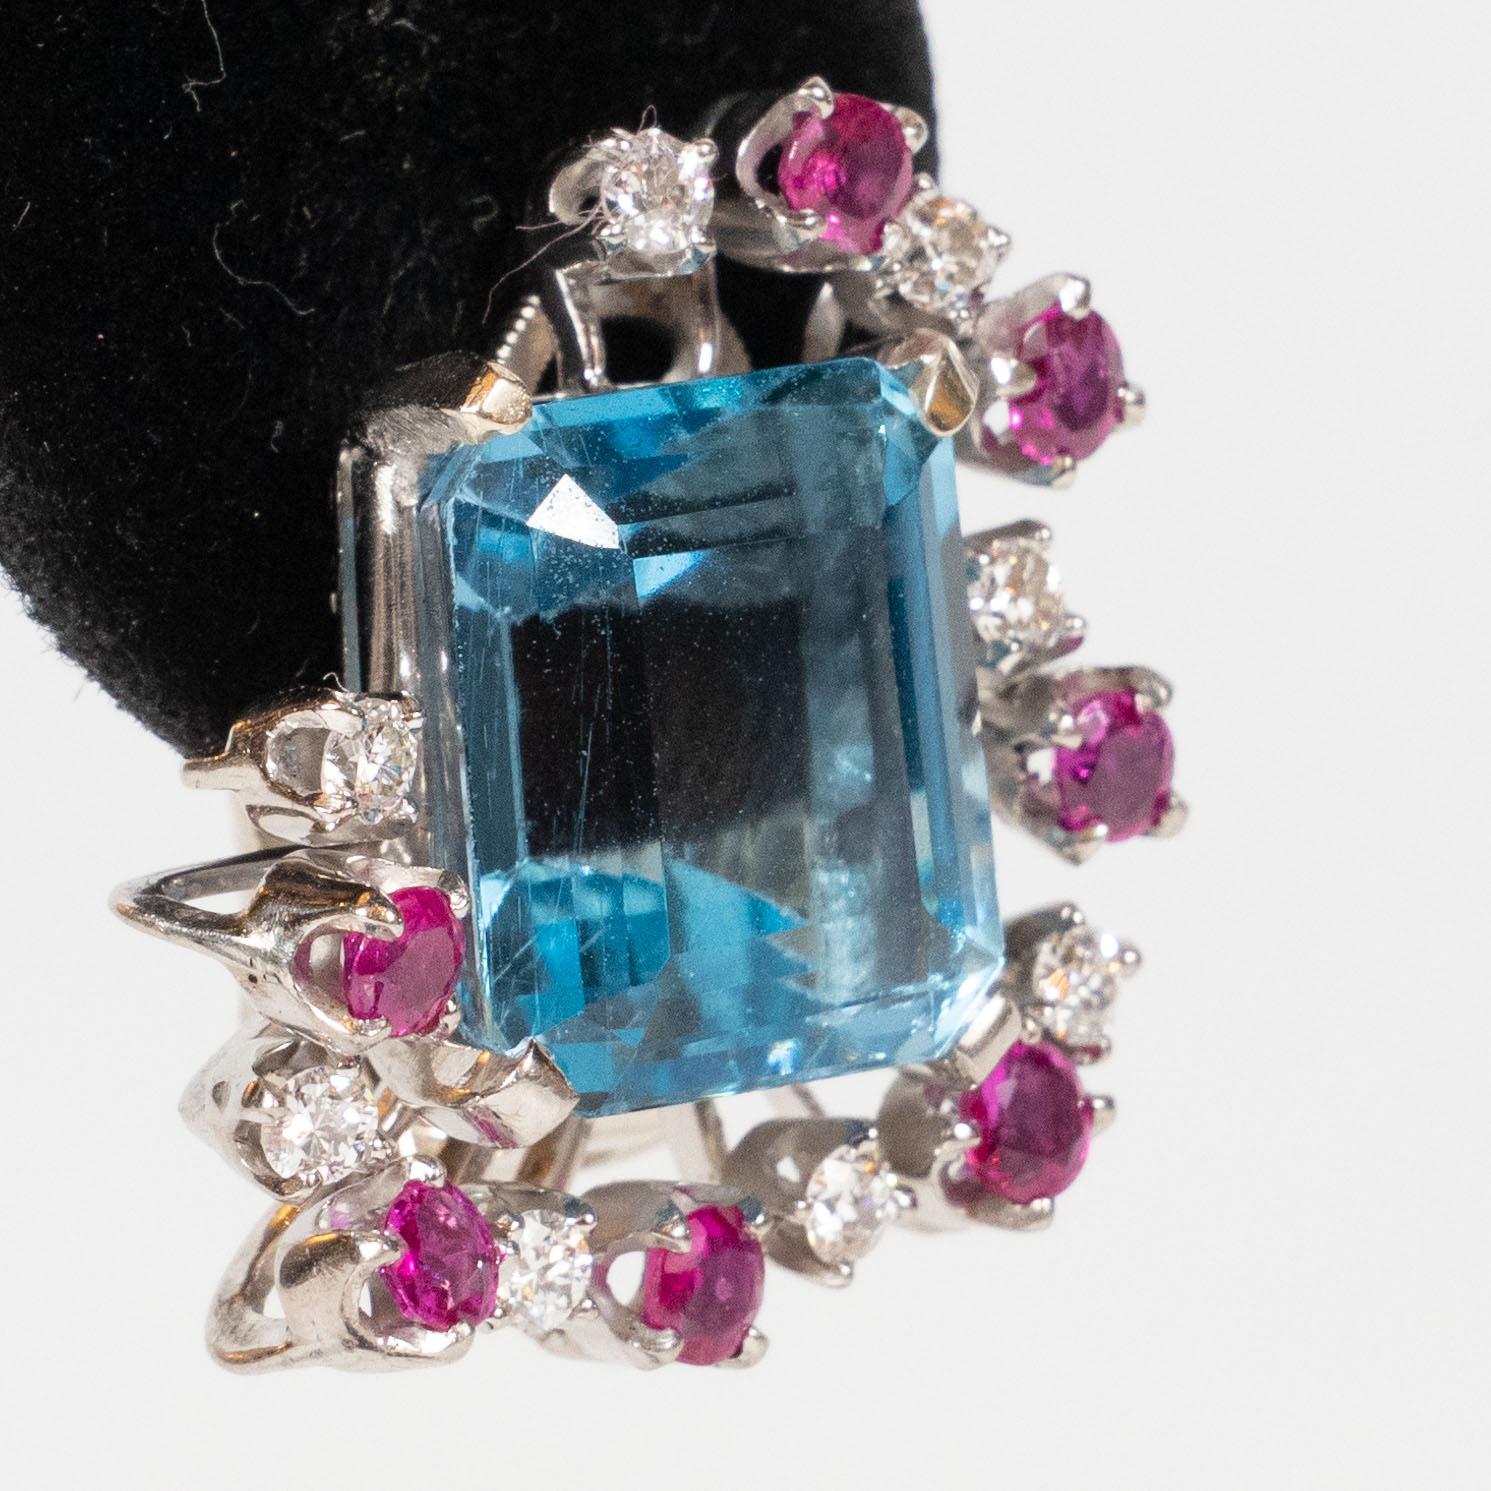 Brilliant Cut 1940s 12 Carat Aquamarine and 14K White Gold Earrings with Diamonds and Rubies For Sale